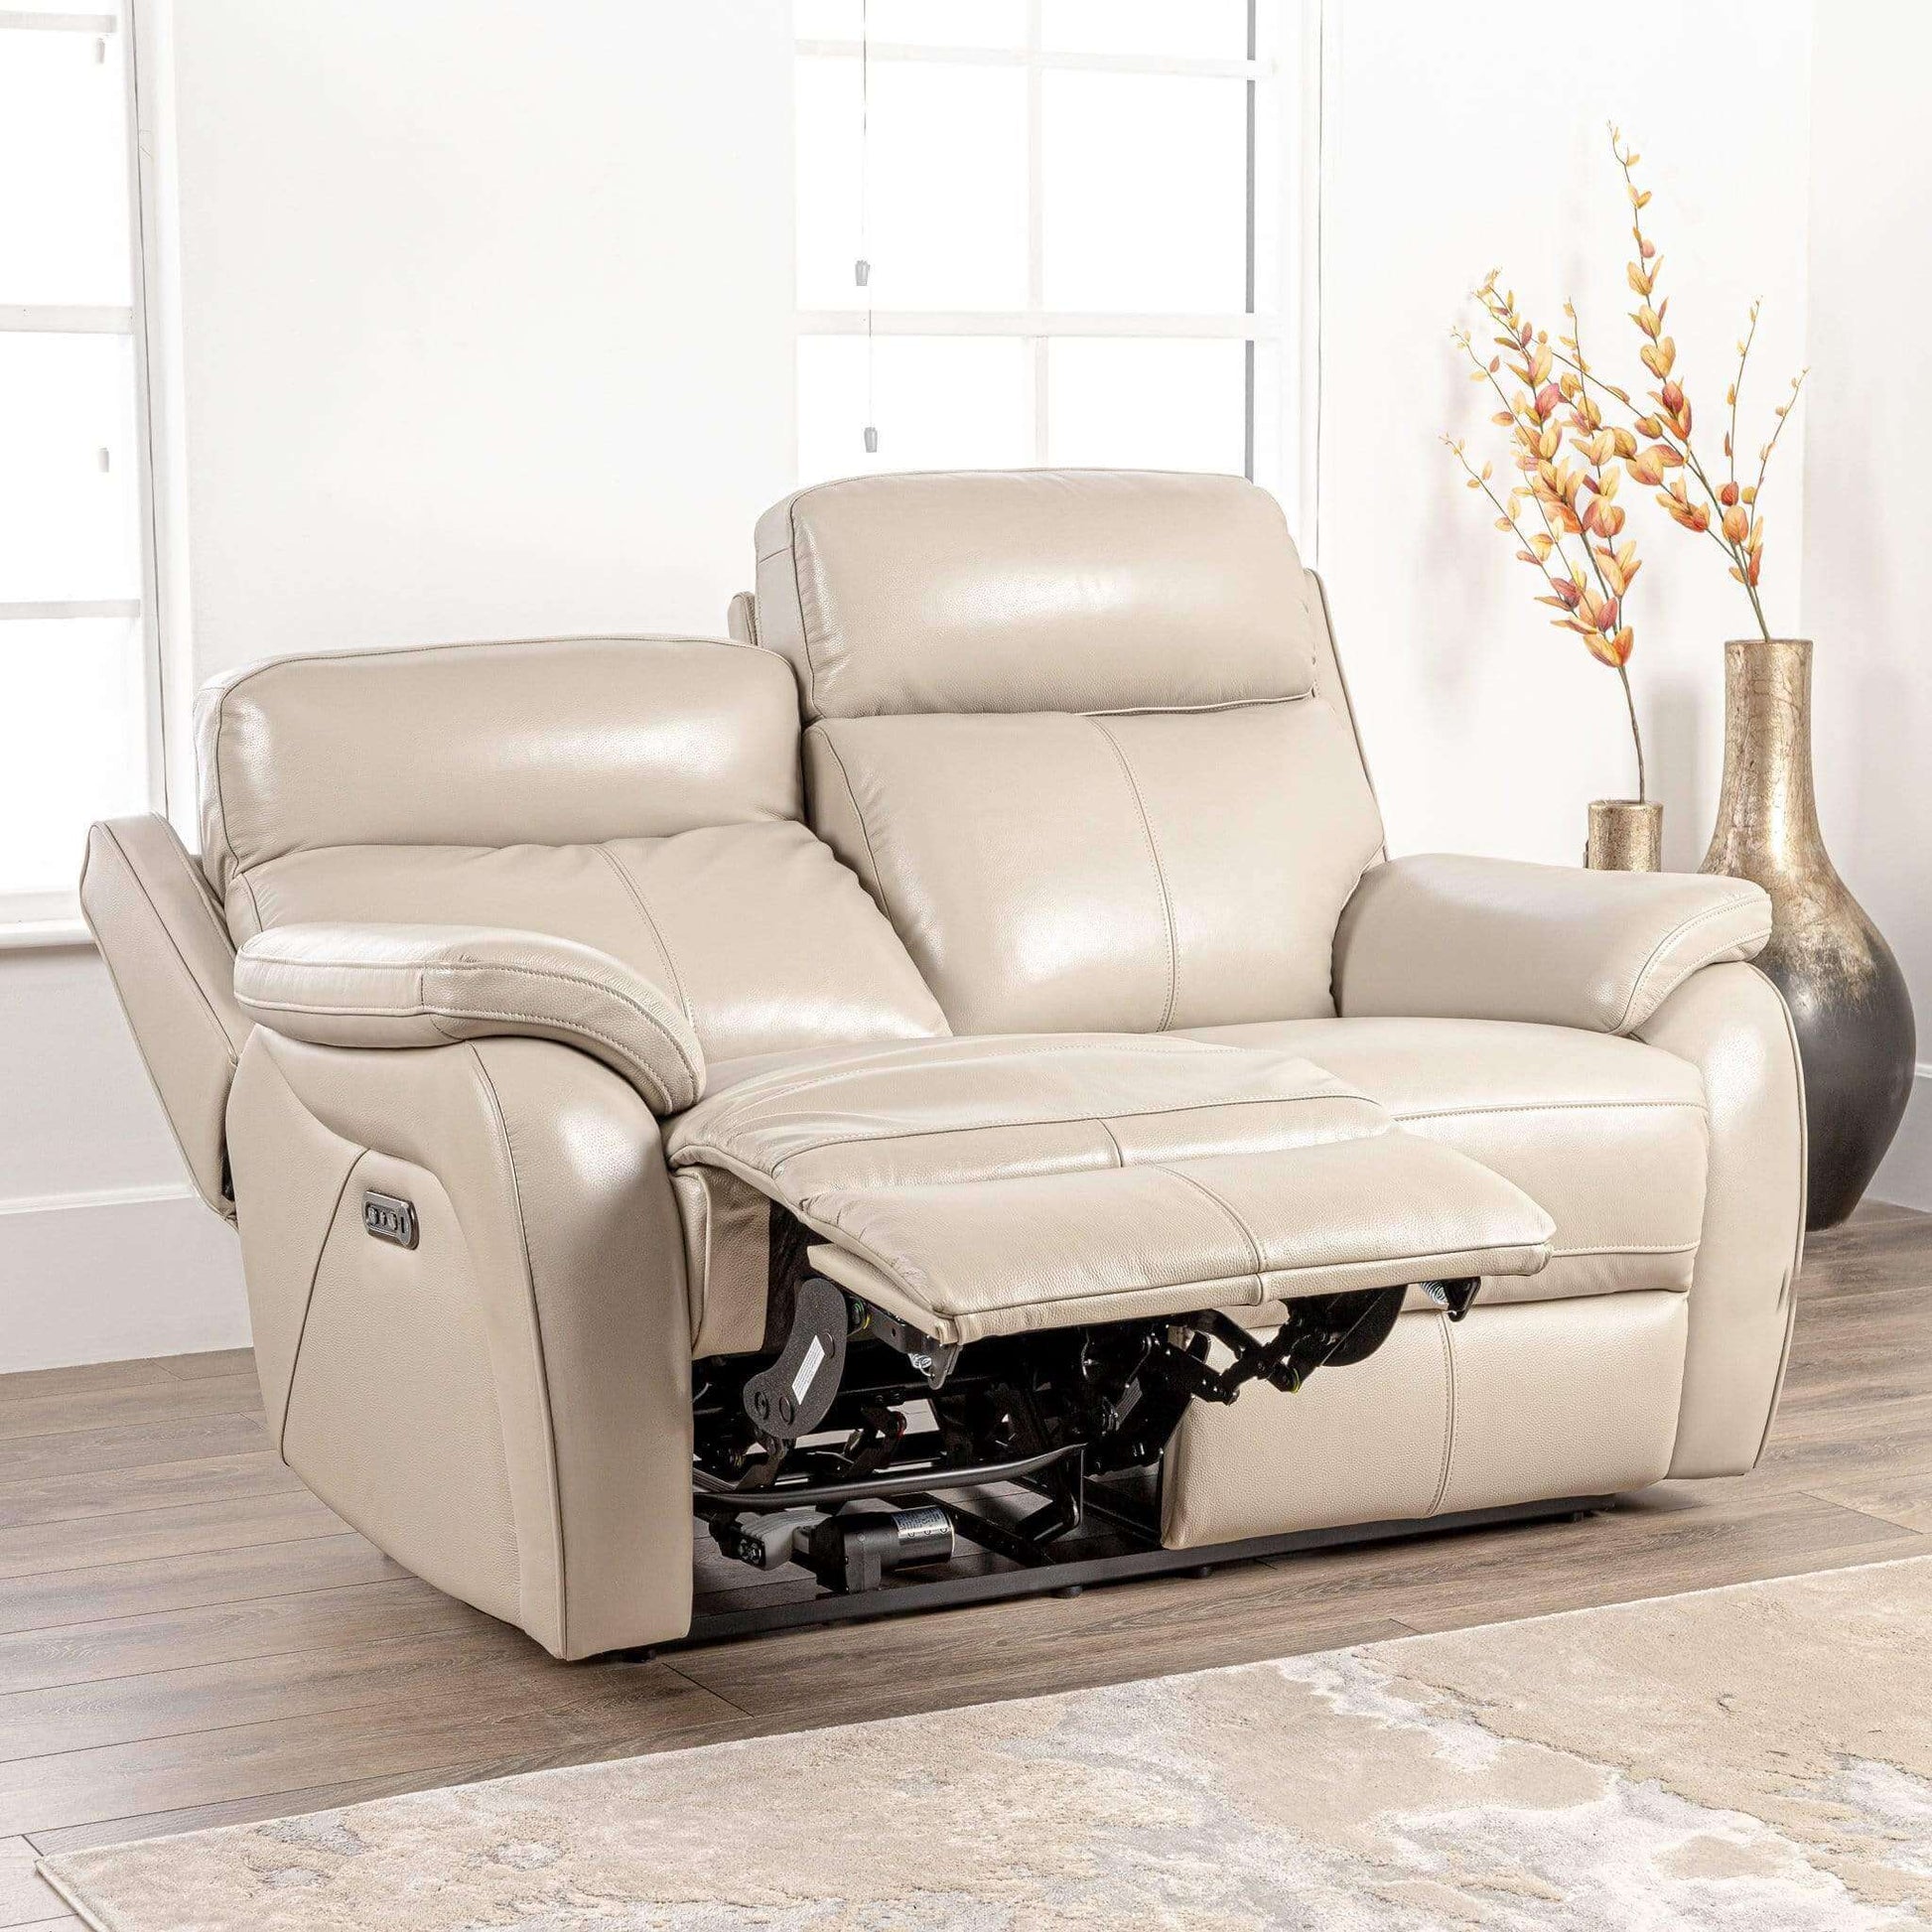 Furniture  -  Comfort King Quincy 2 Seat Electric Reclining Sofa  -  50153205